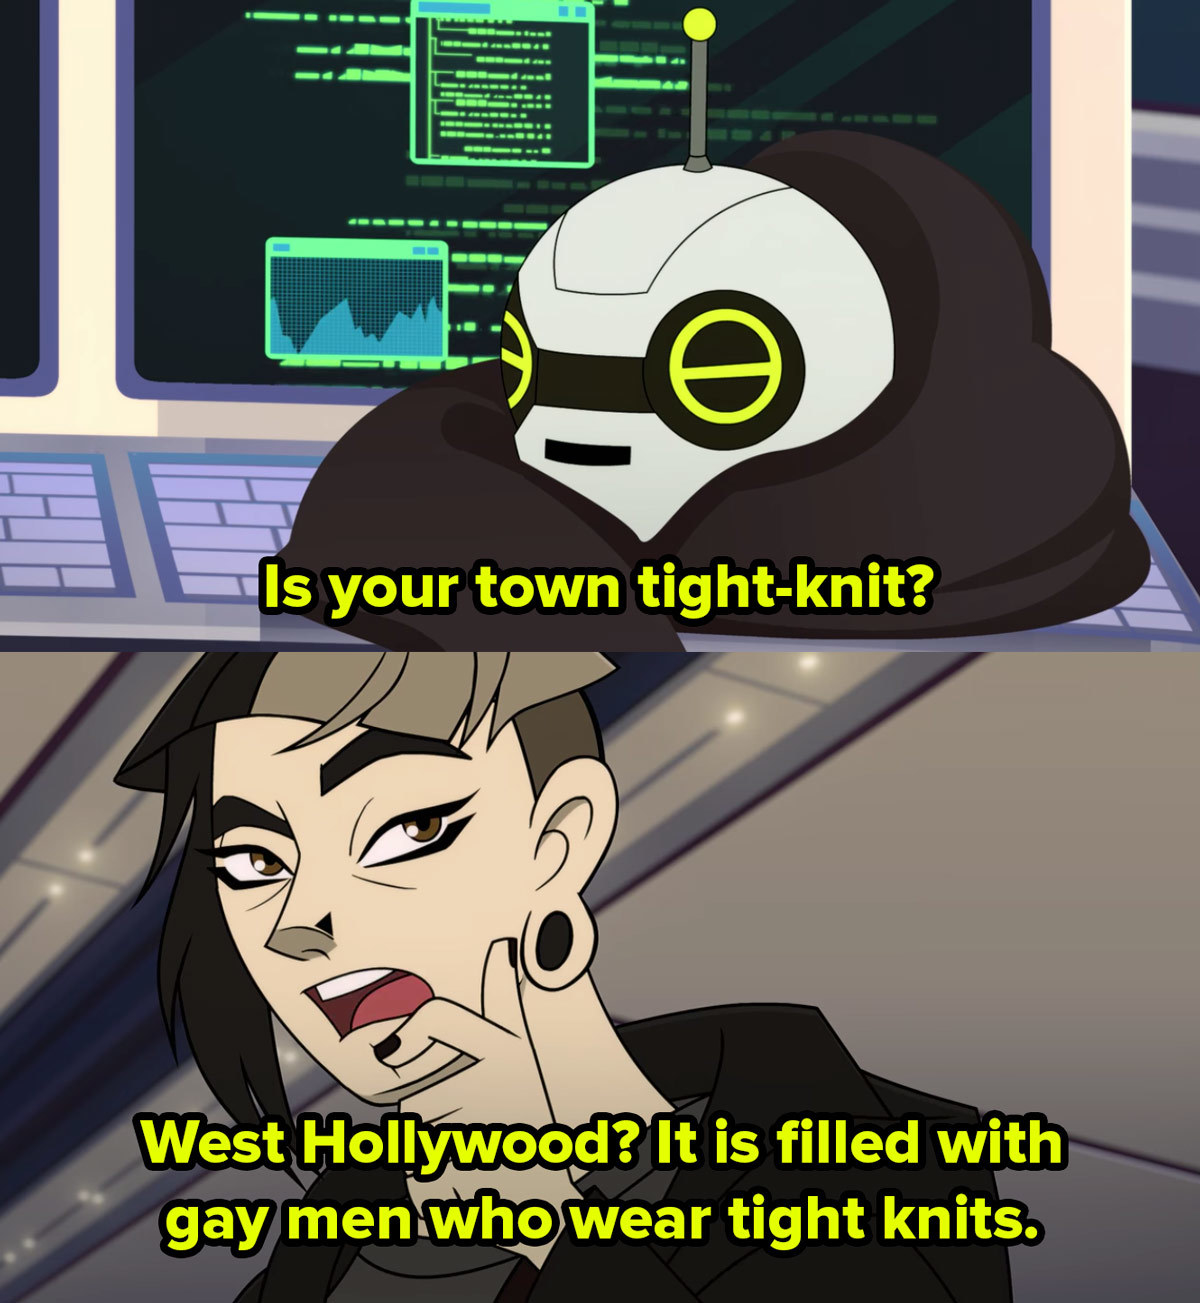 A cartoon robot head on a desk says is your town tight-knit? A cartoon woman replies West Hollywood? It is filled with gay men who wear tight knits